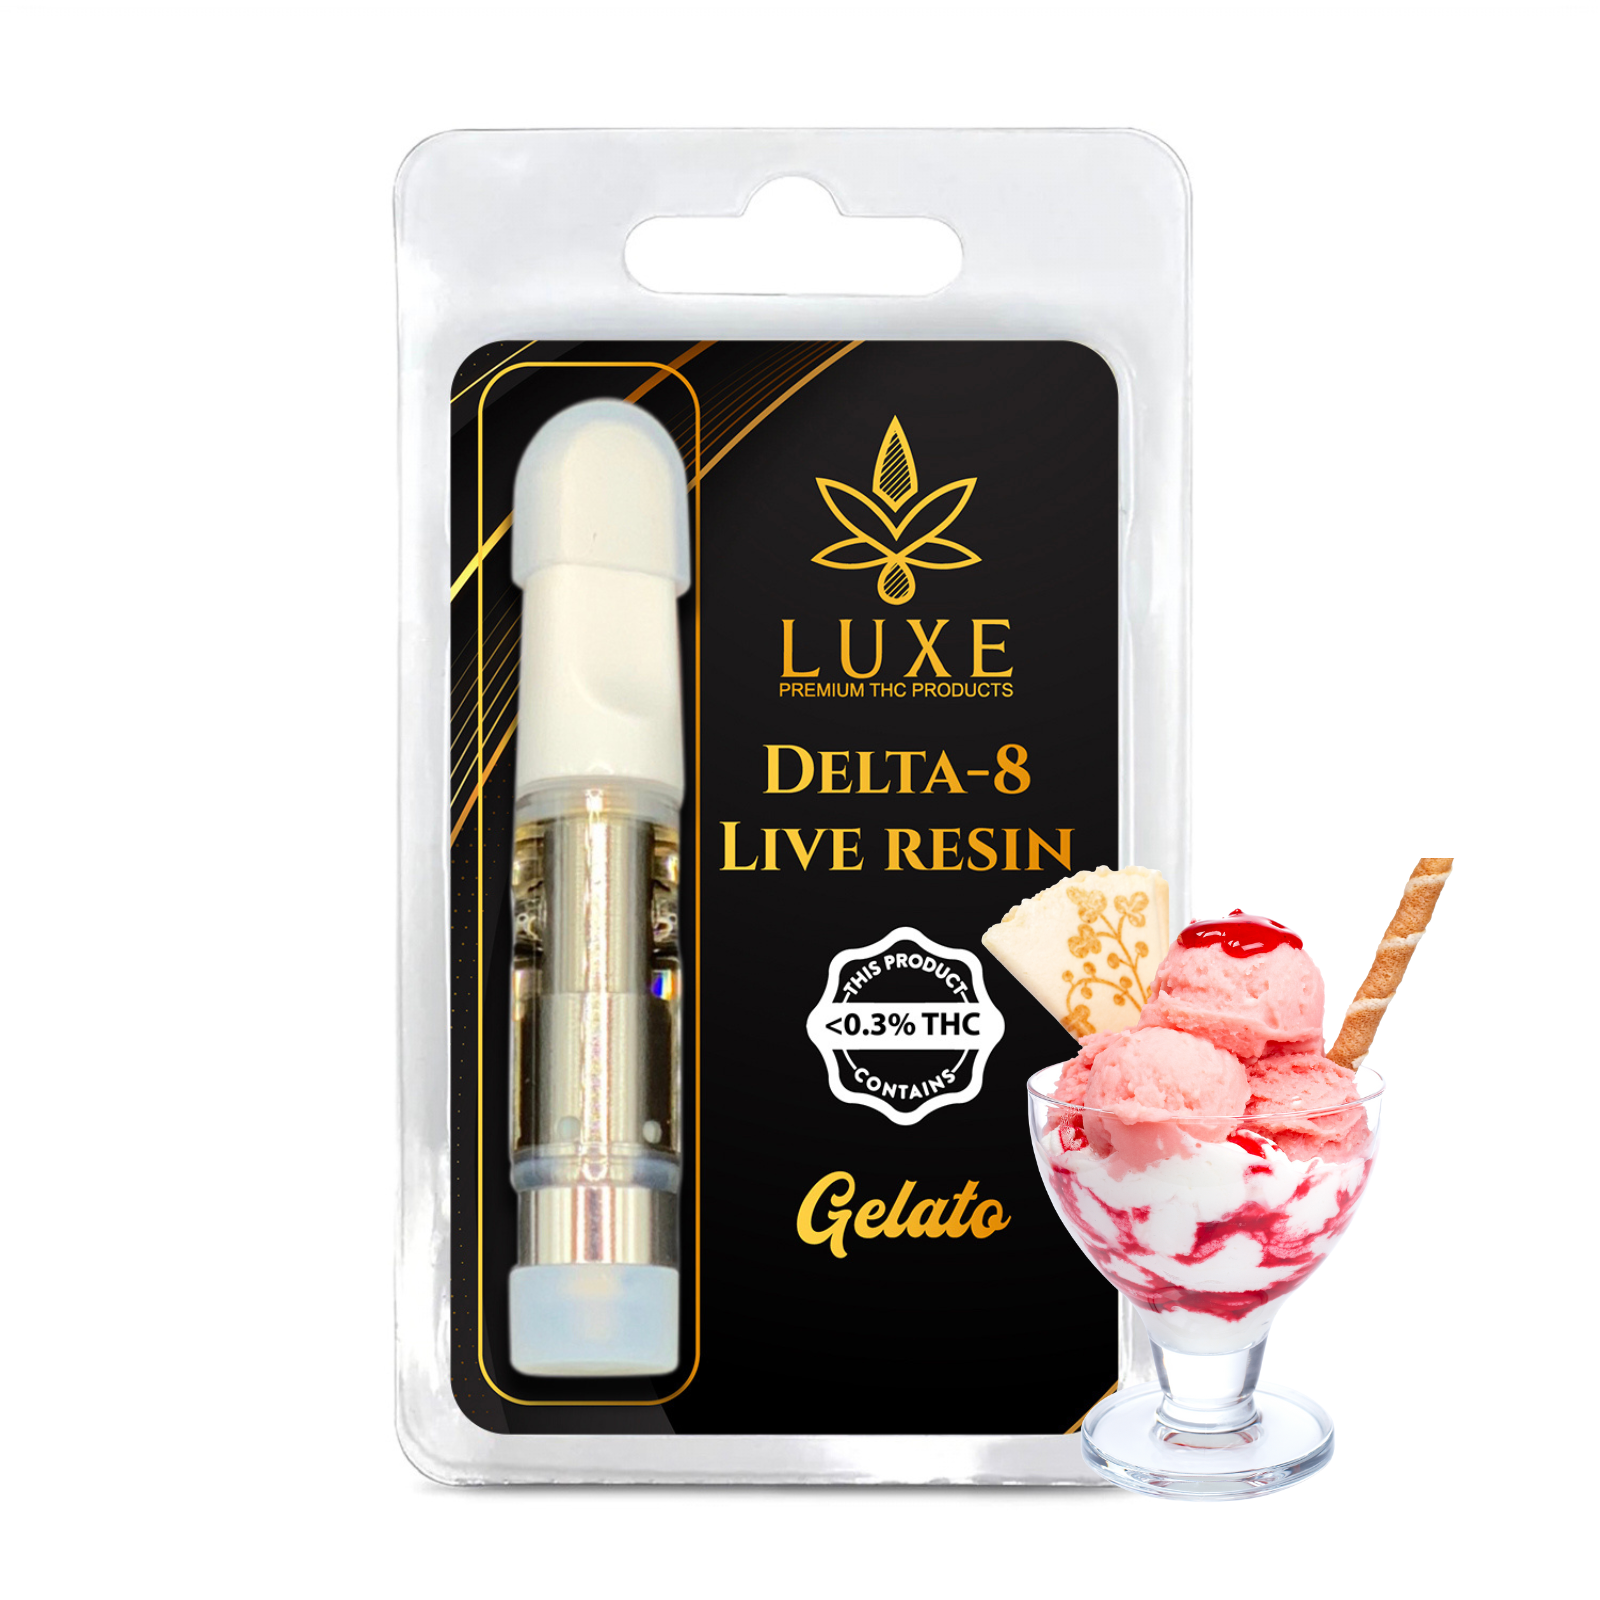 Simply Crafted Free Shipping Save 25 With Code Leafly Gelato Live Resin Delta 8 Thc Vape 9546